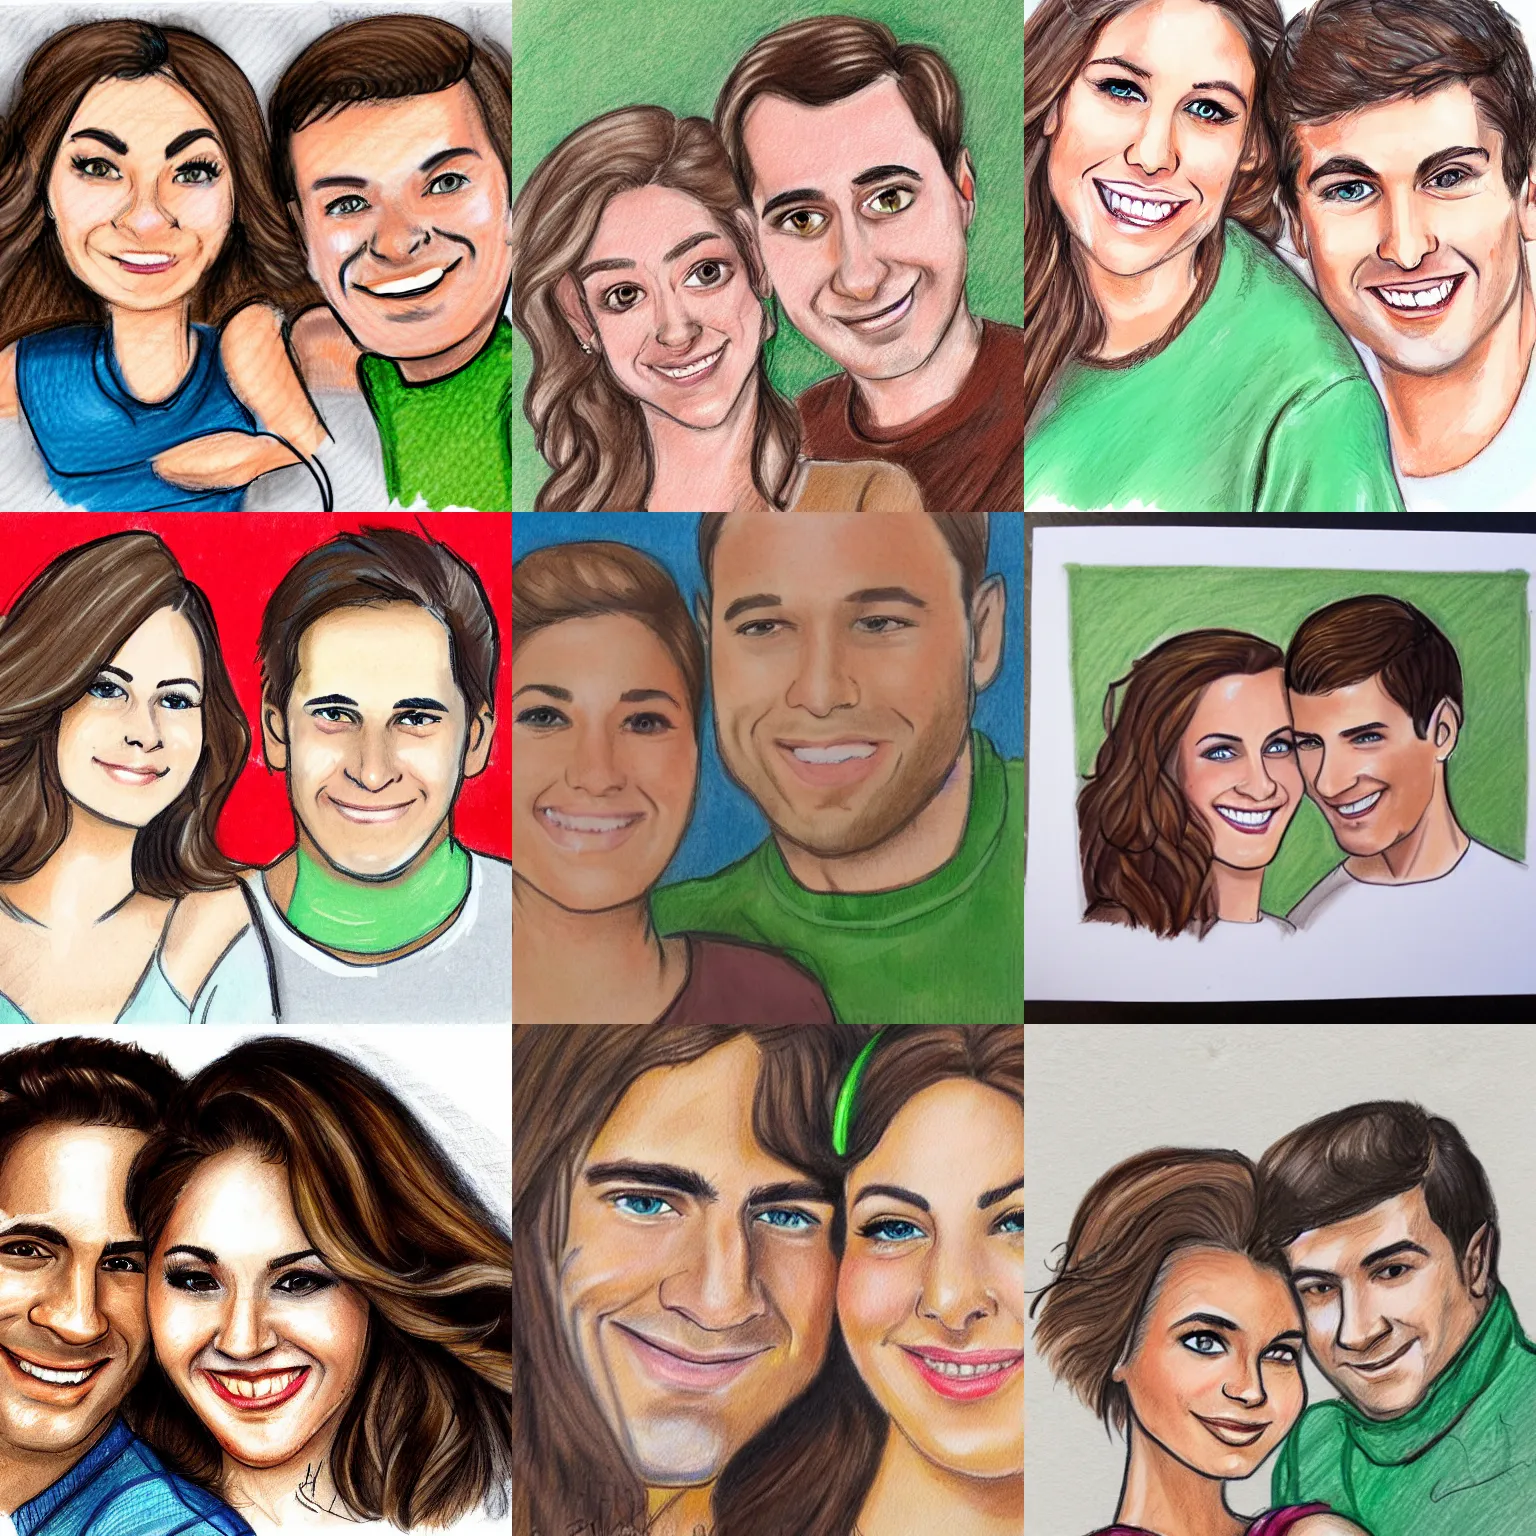 Prompt: Sketch of happy couple. Clean shaven man with light brown hair and hazel eyes, woman with wavy dark brown hair and green eyes, done by expert sketch artist, full color.